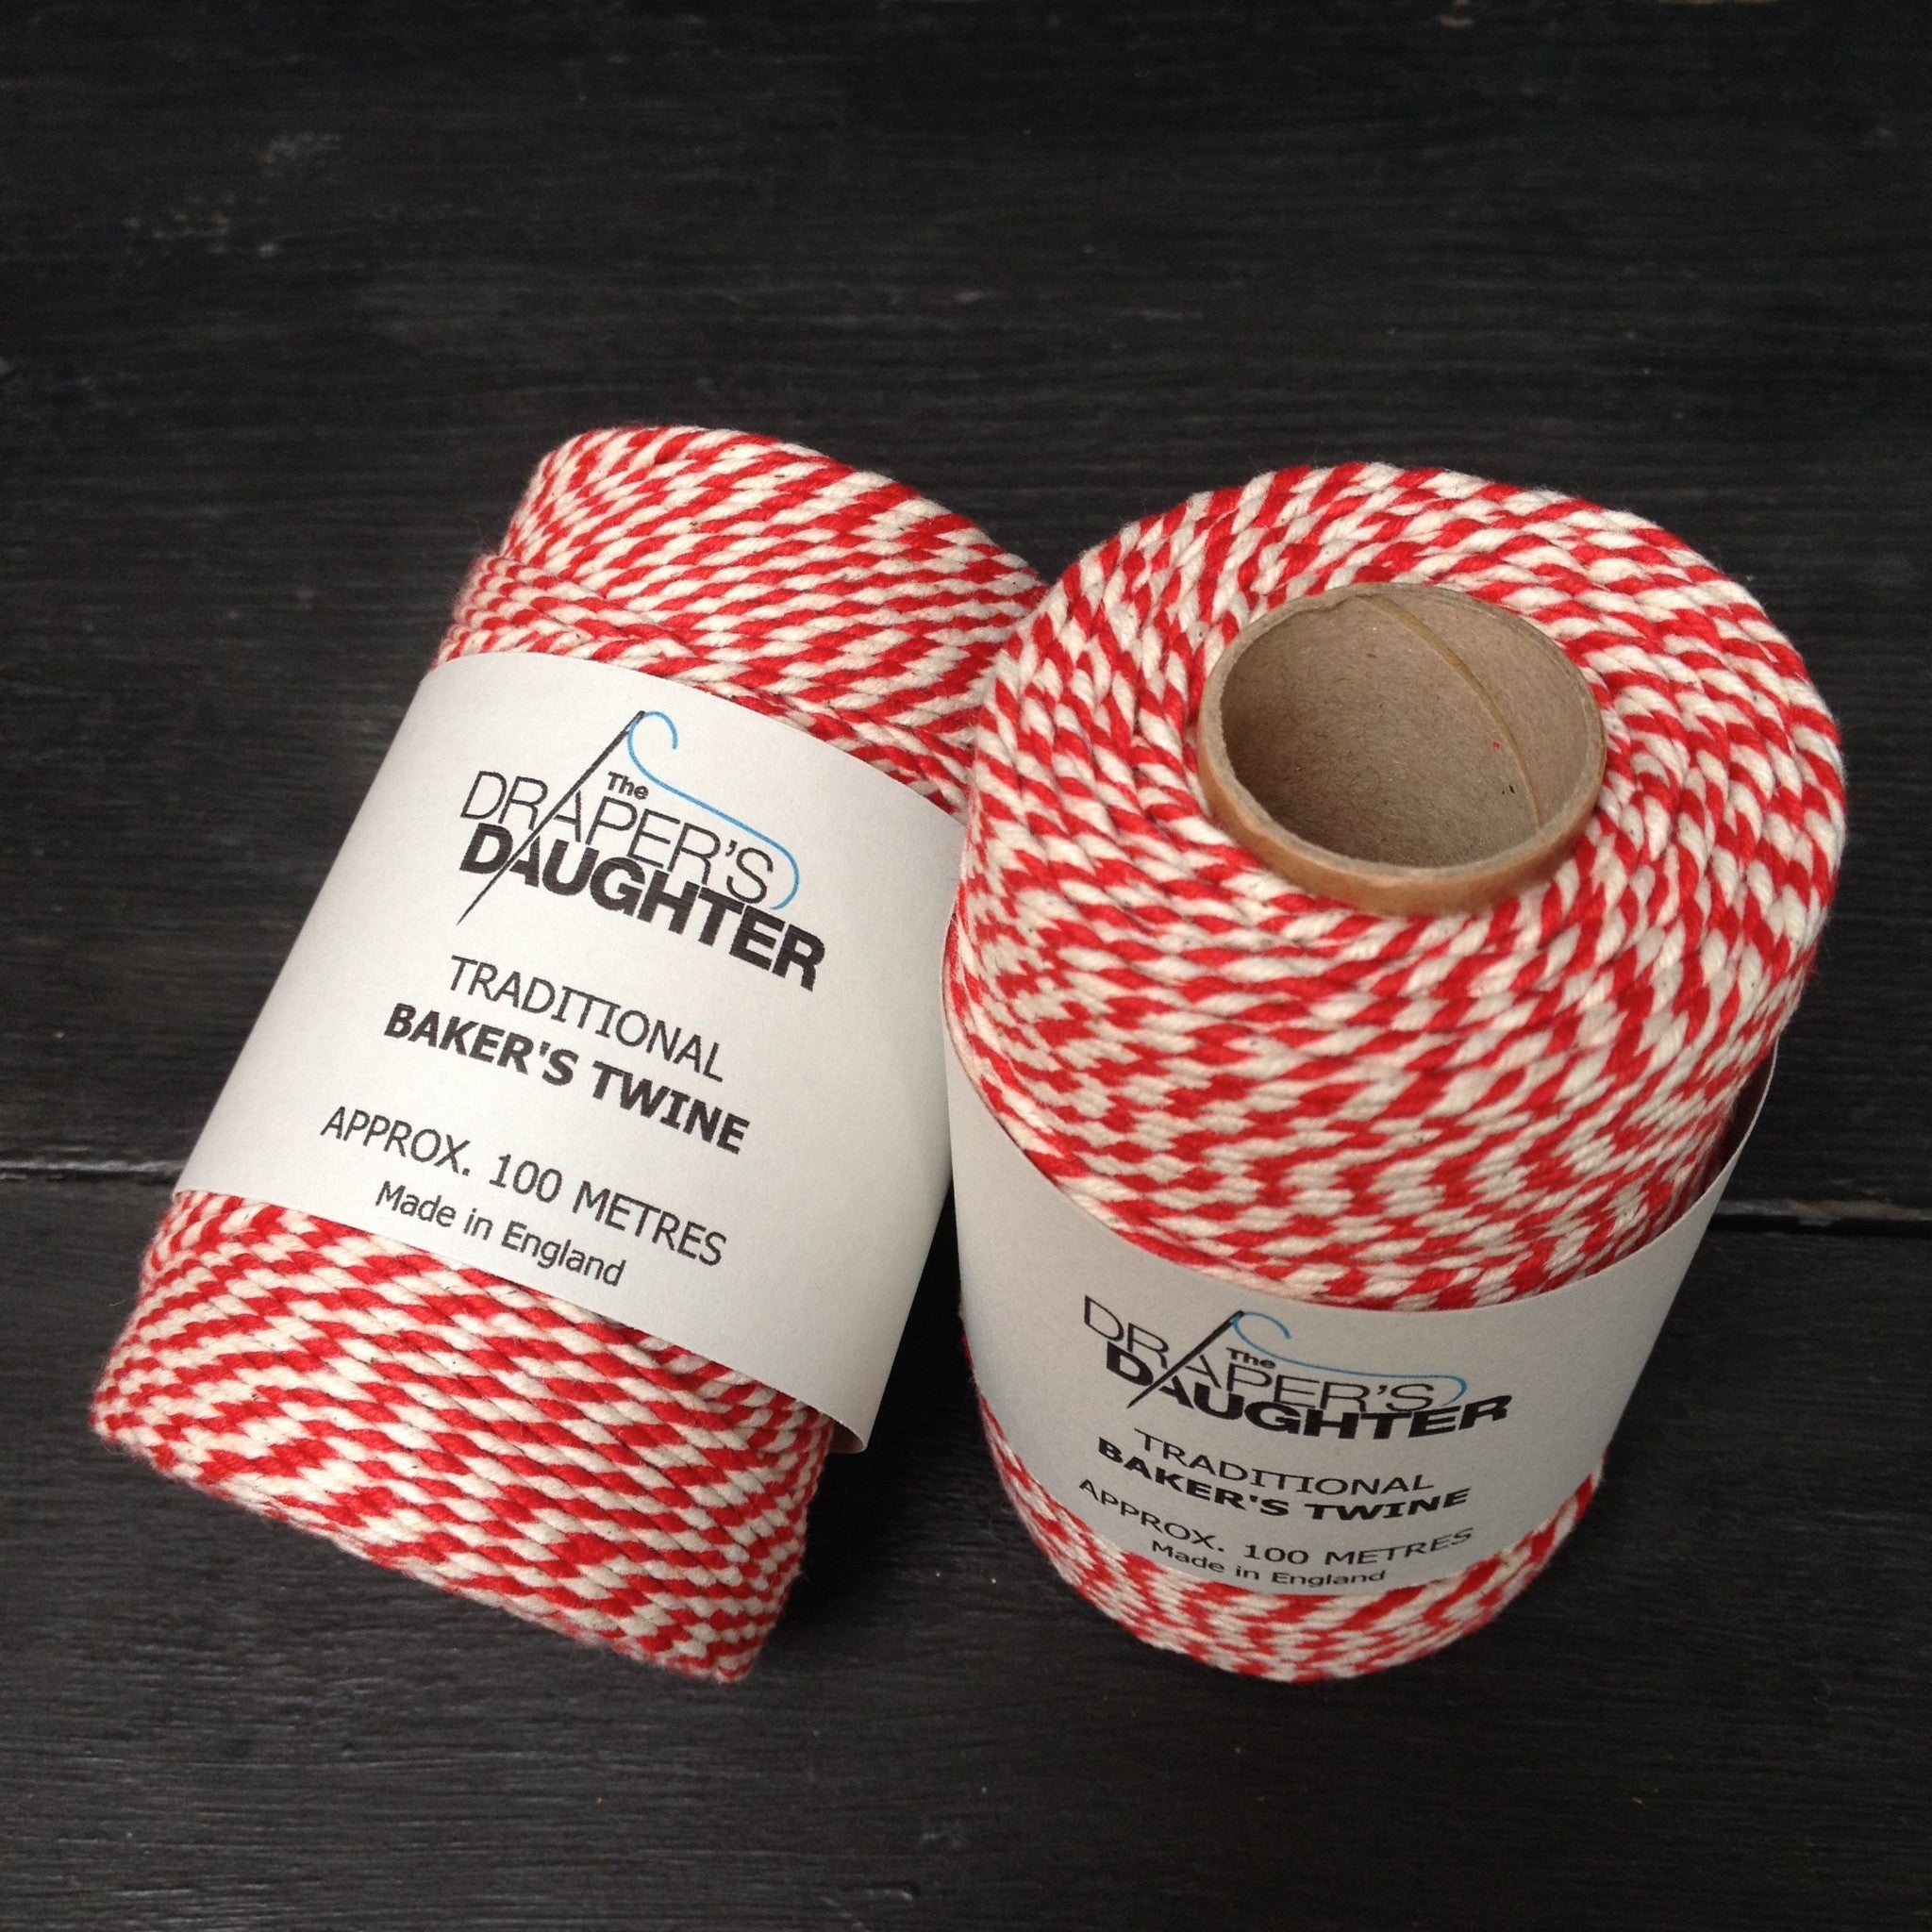 The Draper's Daughter Traditional Baker's Twine in Red 